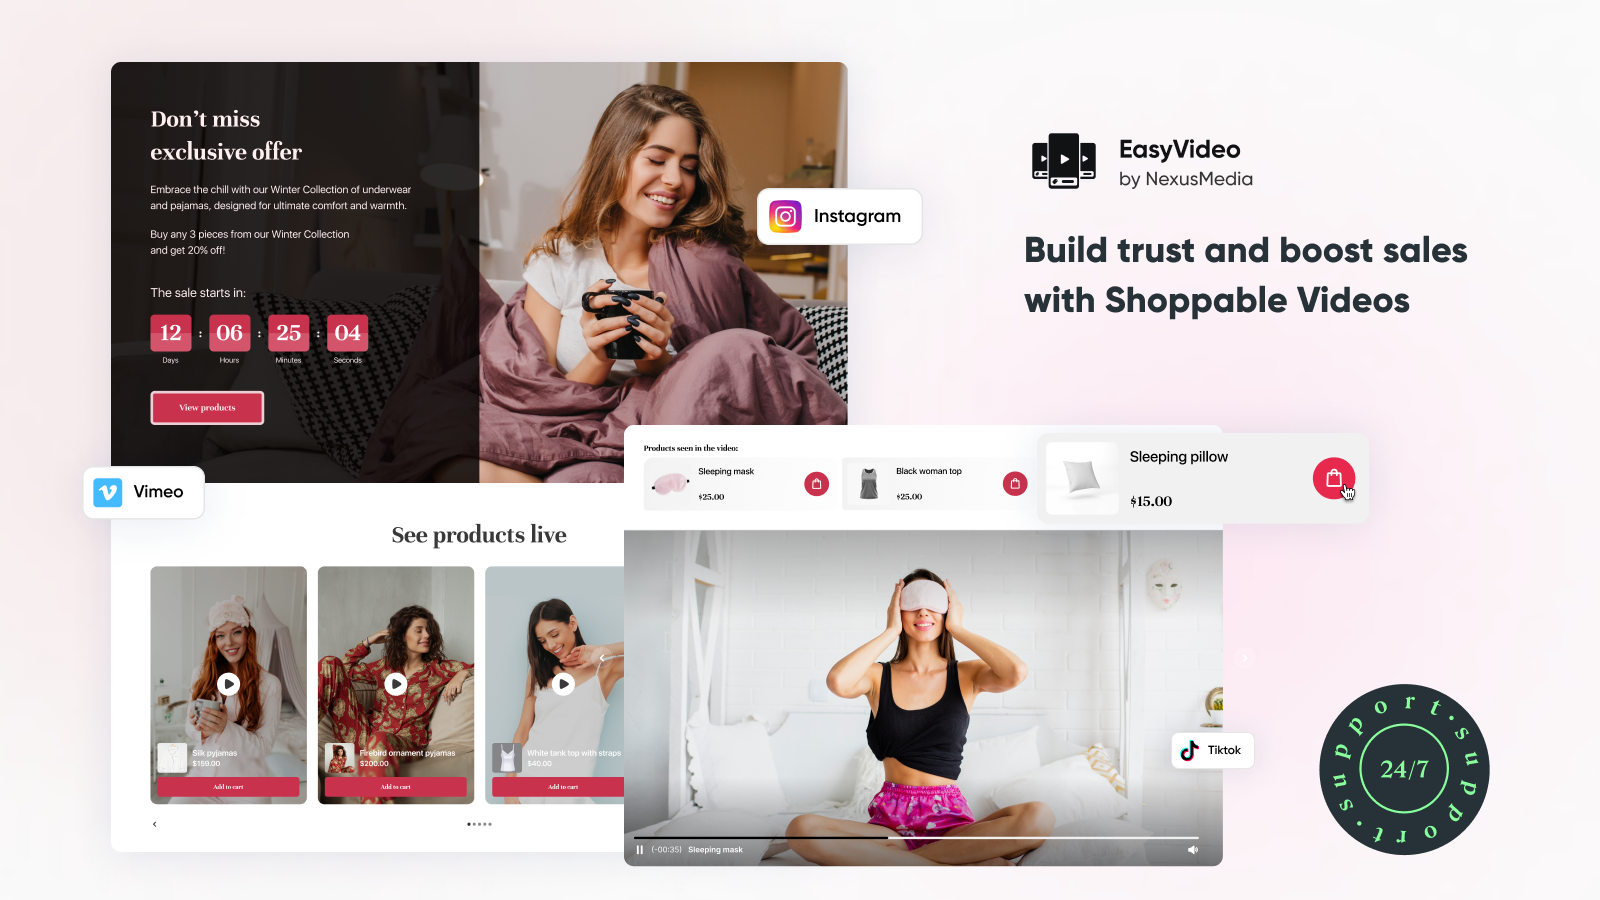 Build trust and boost sales with Shoppable Videos